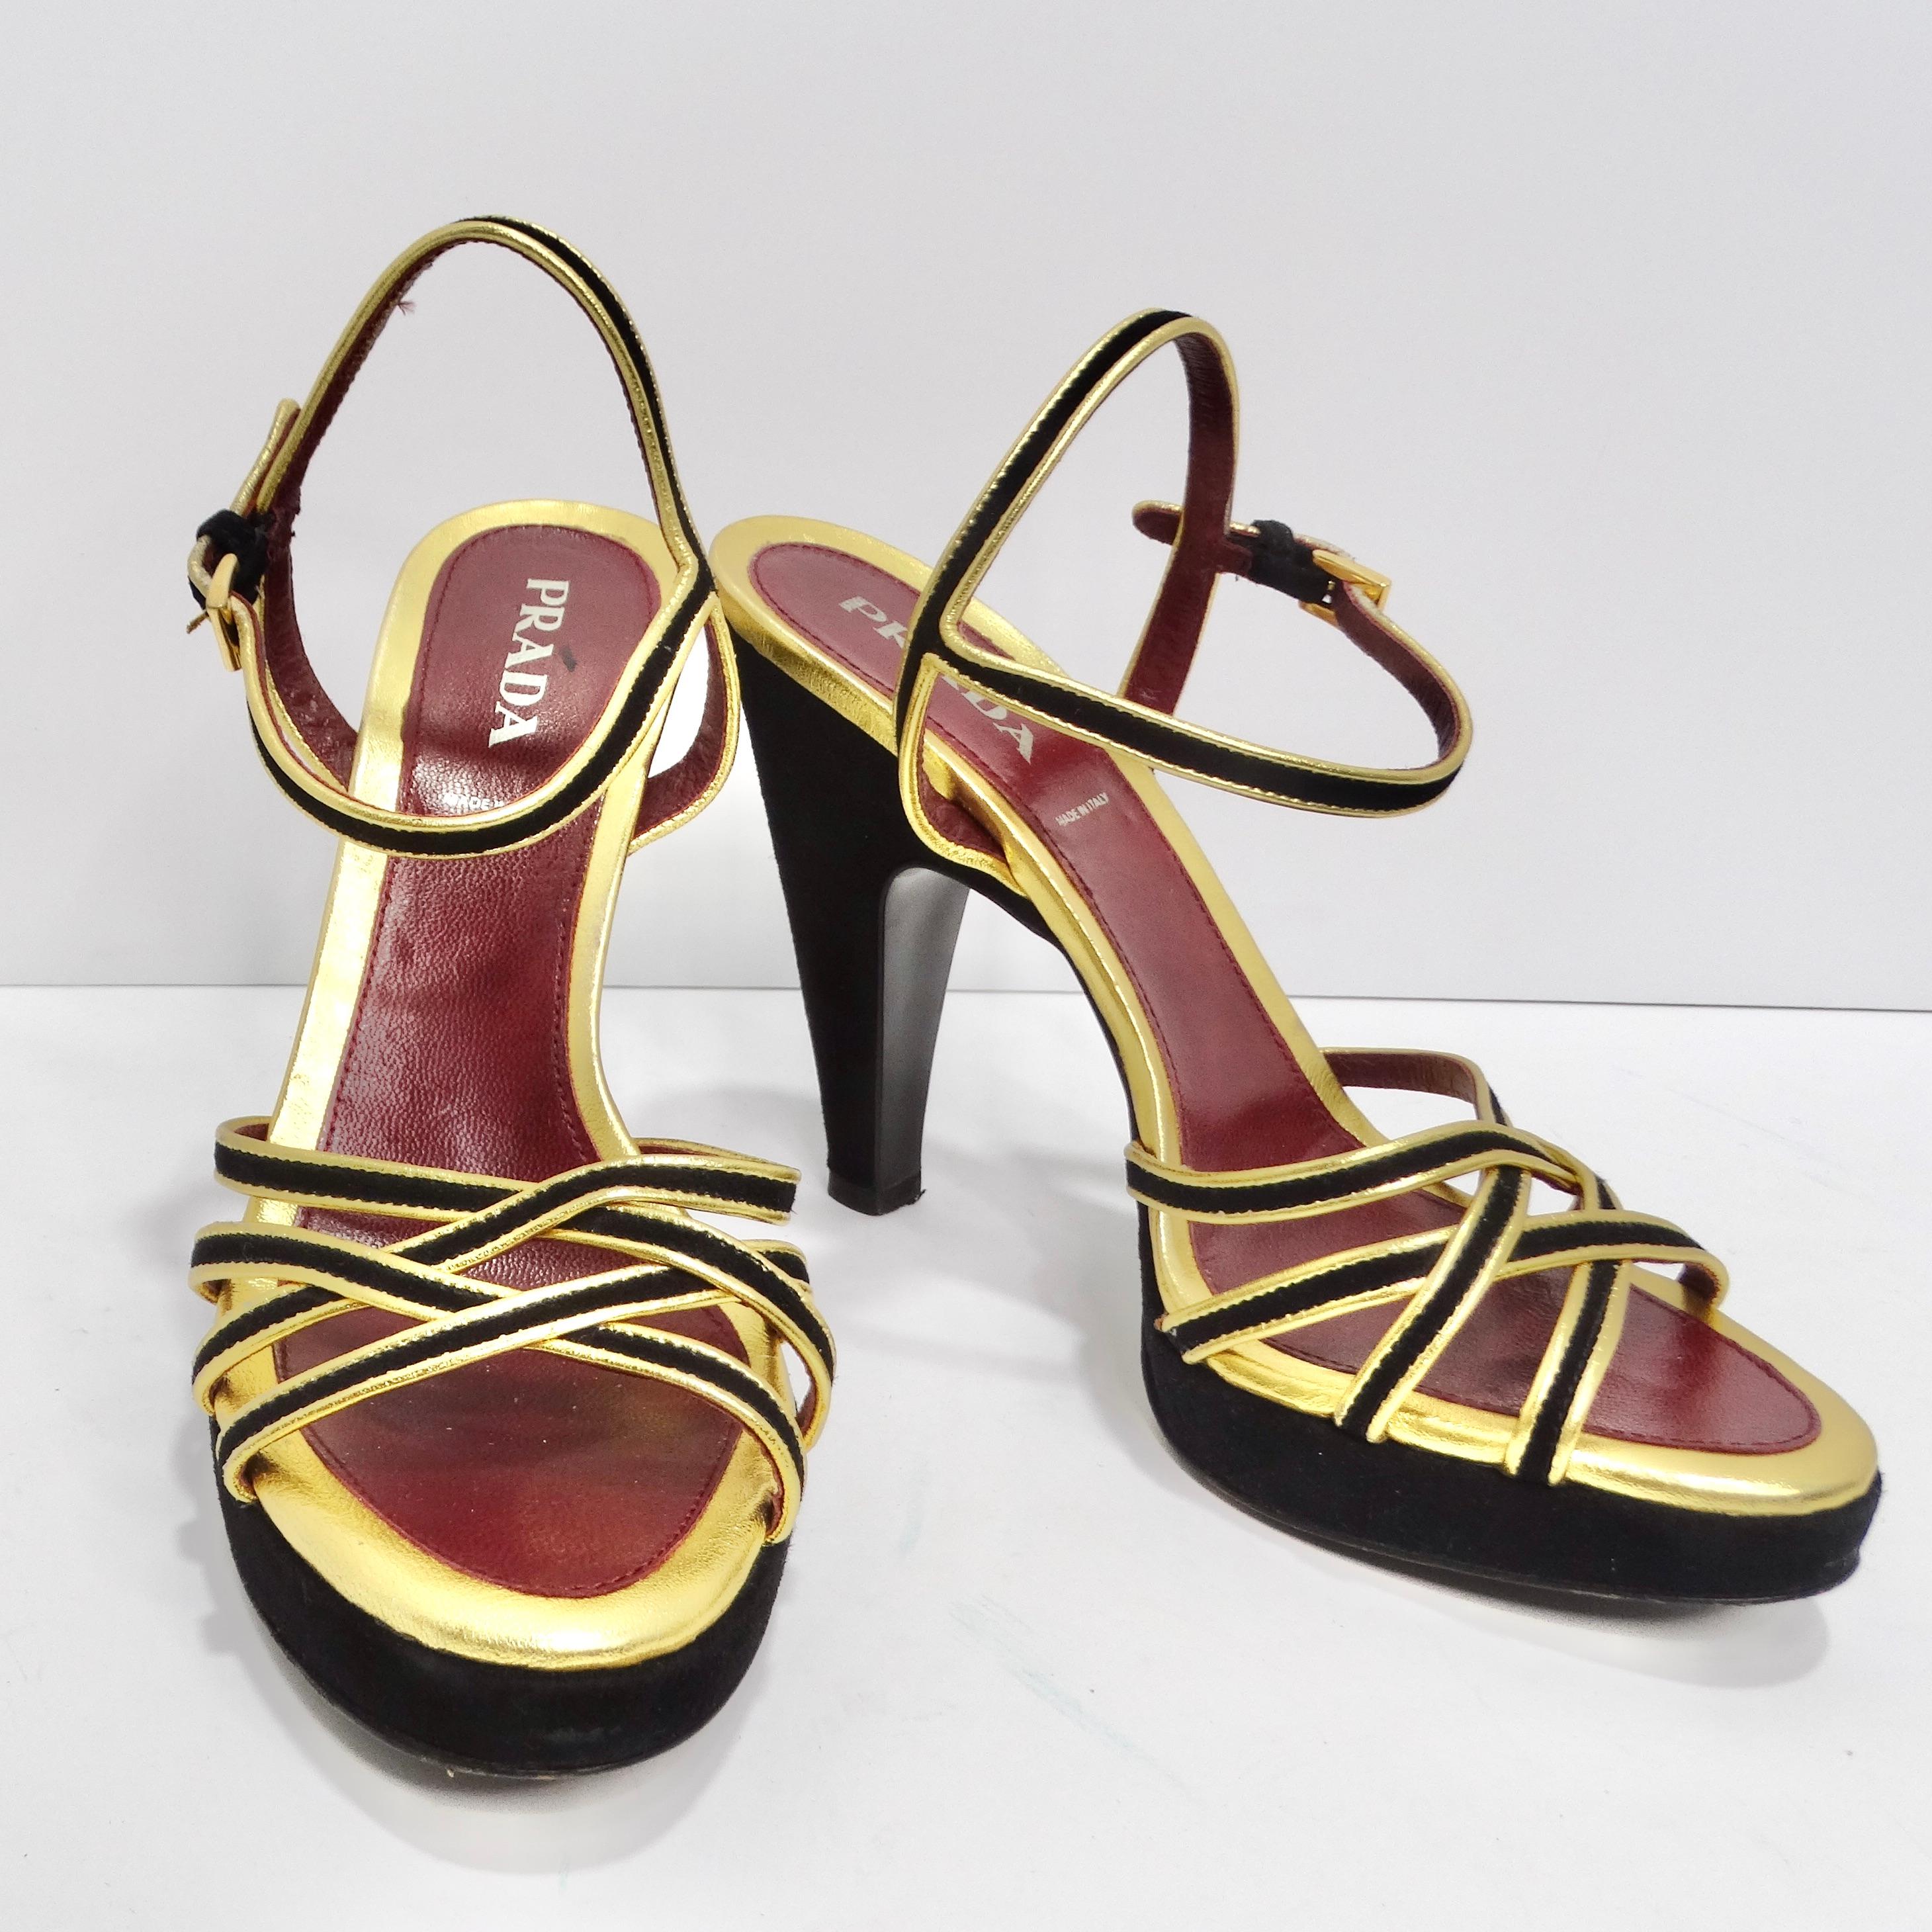 Step into sophistication with our exquisite Prada Black Suede Metallic Gold Strappy Pumps. Crafted to perfection, these pumps are the epitome of luxury and style, designed to make a bold statement wherever you go. The soft suede material not only